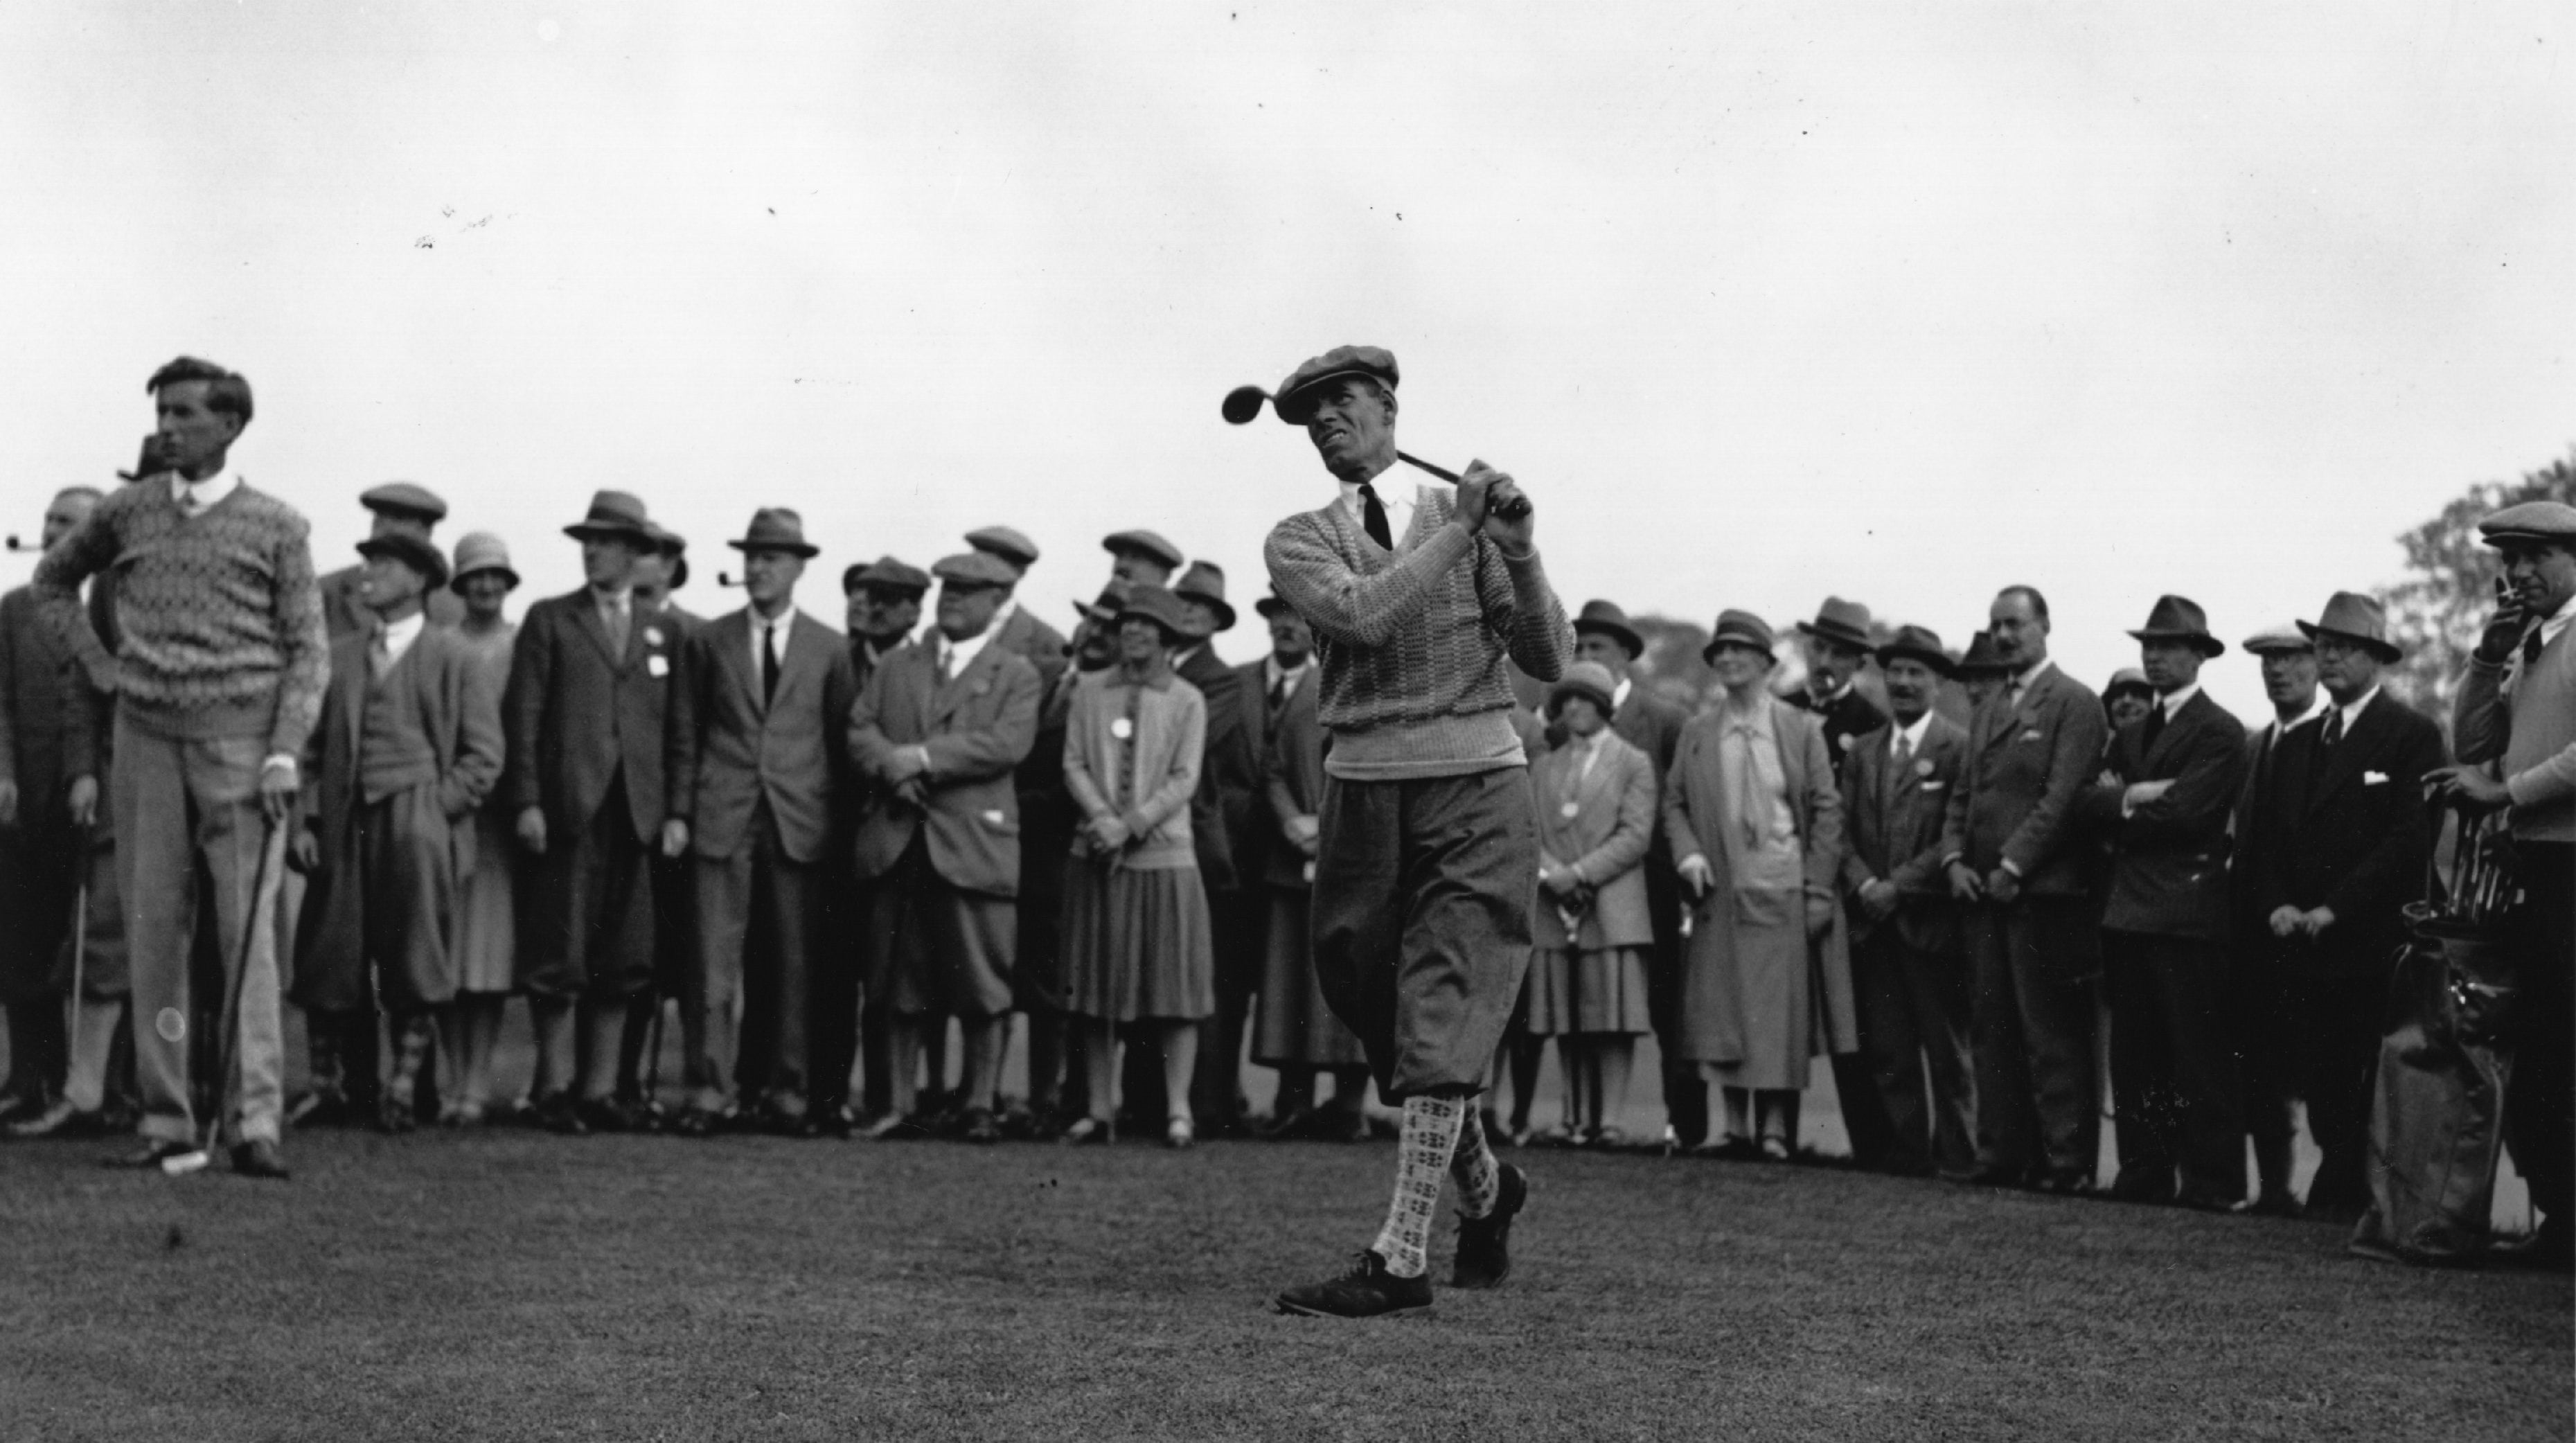 George Duncan playing a shot